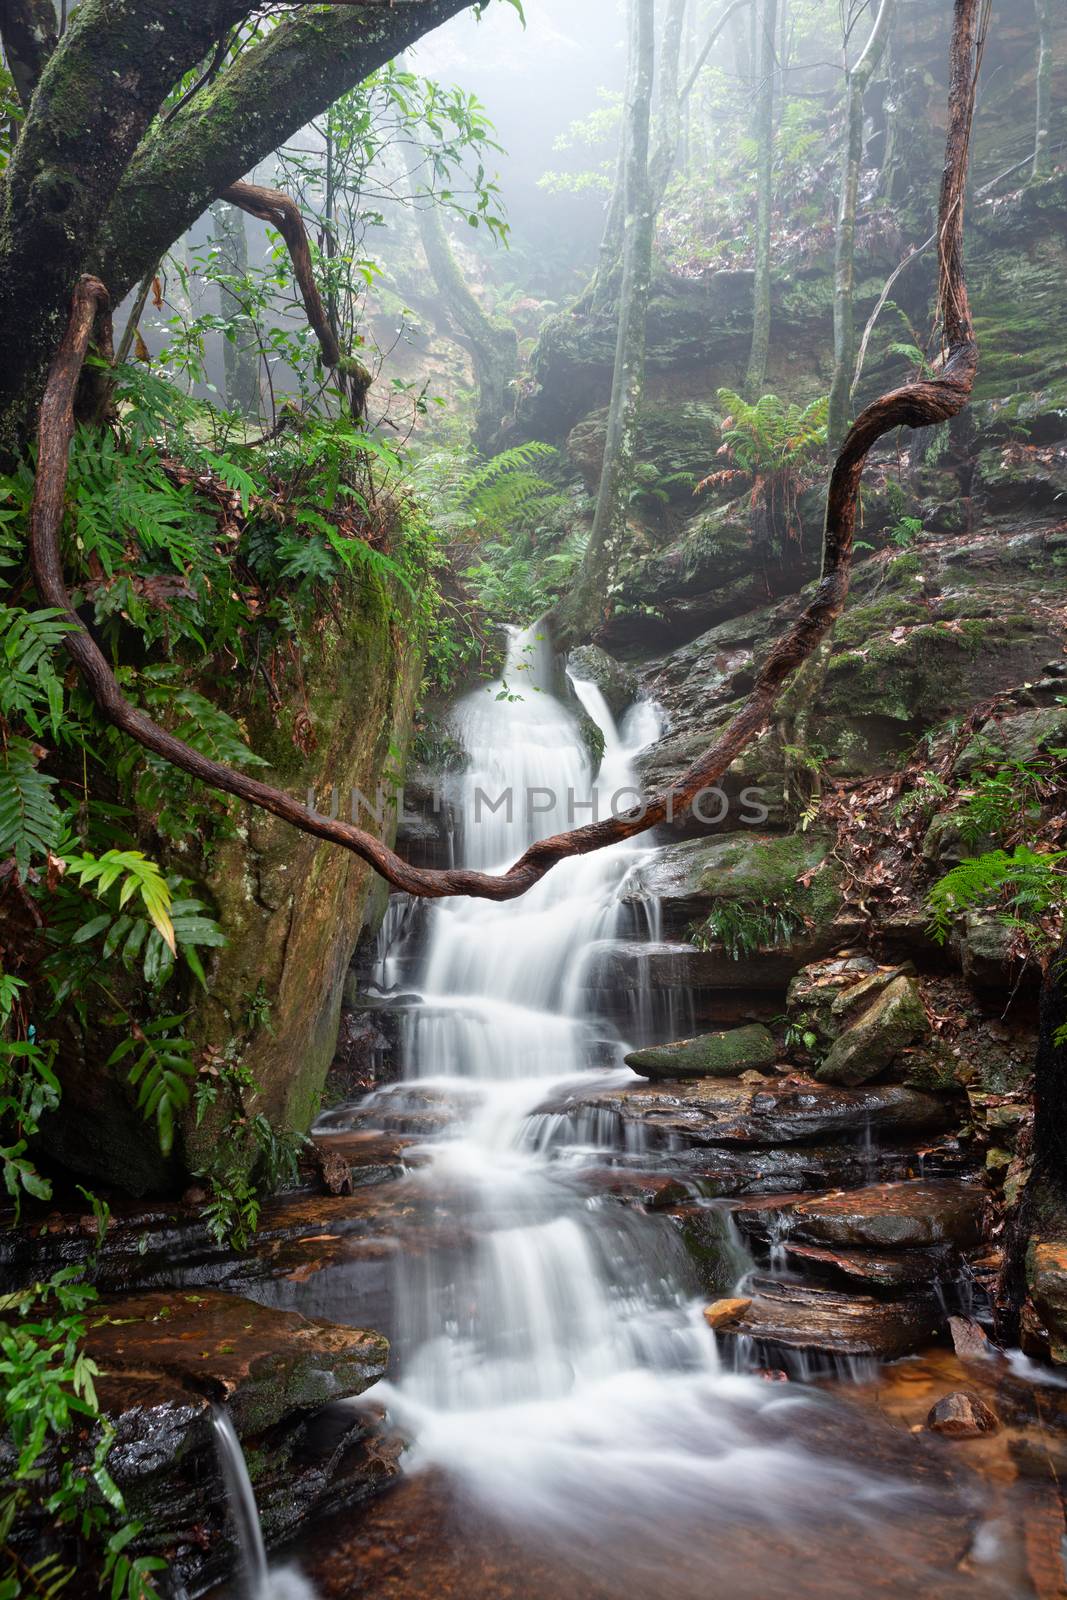 Nature's playground - beautiful cascading waterfall down the fog filled valley filled with trees and lush ferns.  A vine swing in the foreground.